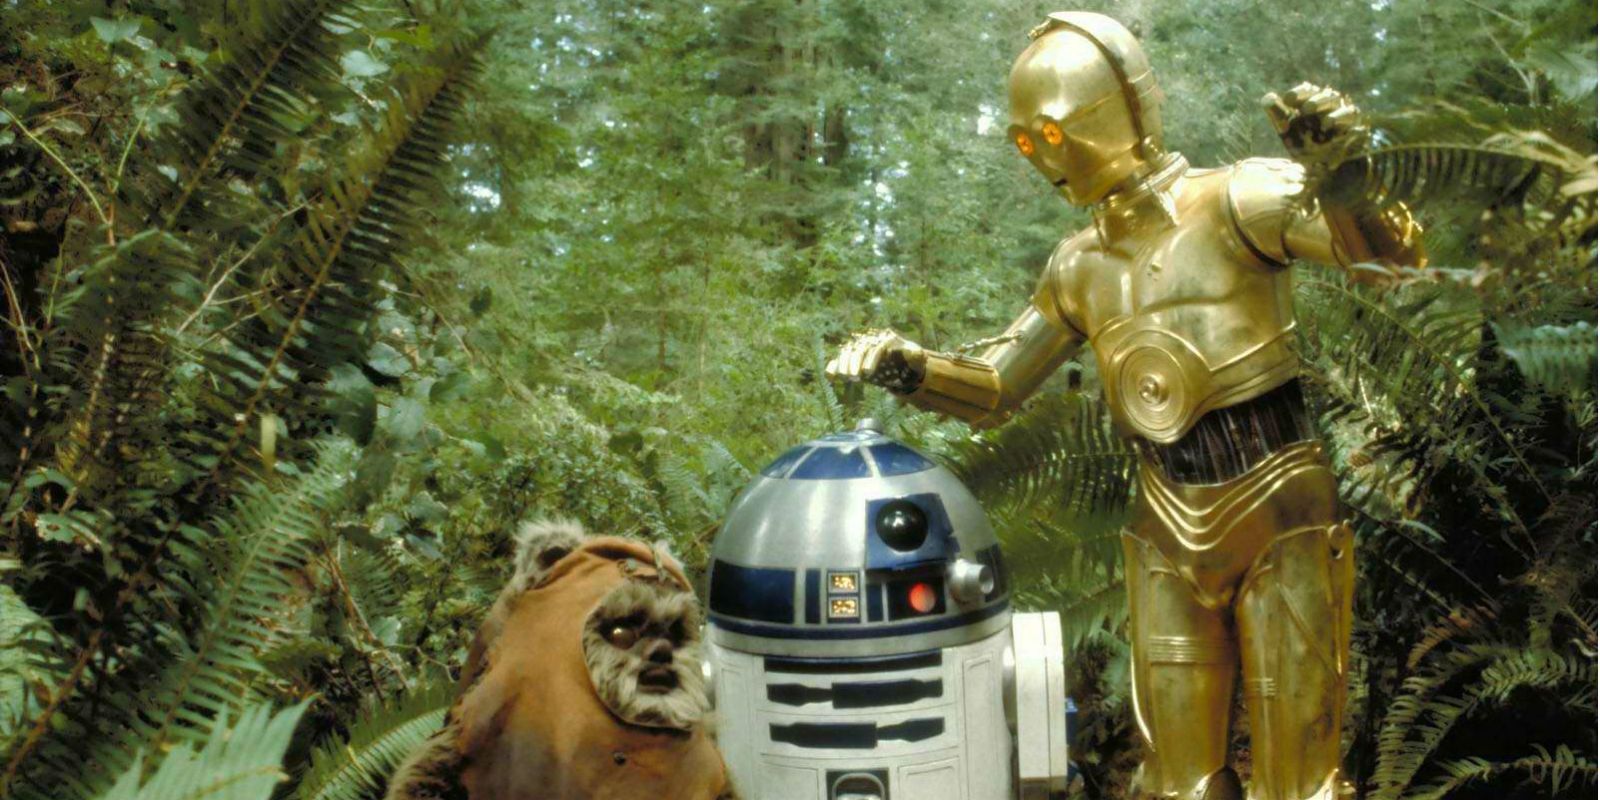 R2-D2 C-3PO and Wicket the Ewok on the moon Endor in Star Wars The Return of the Jedi